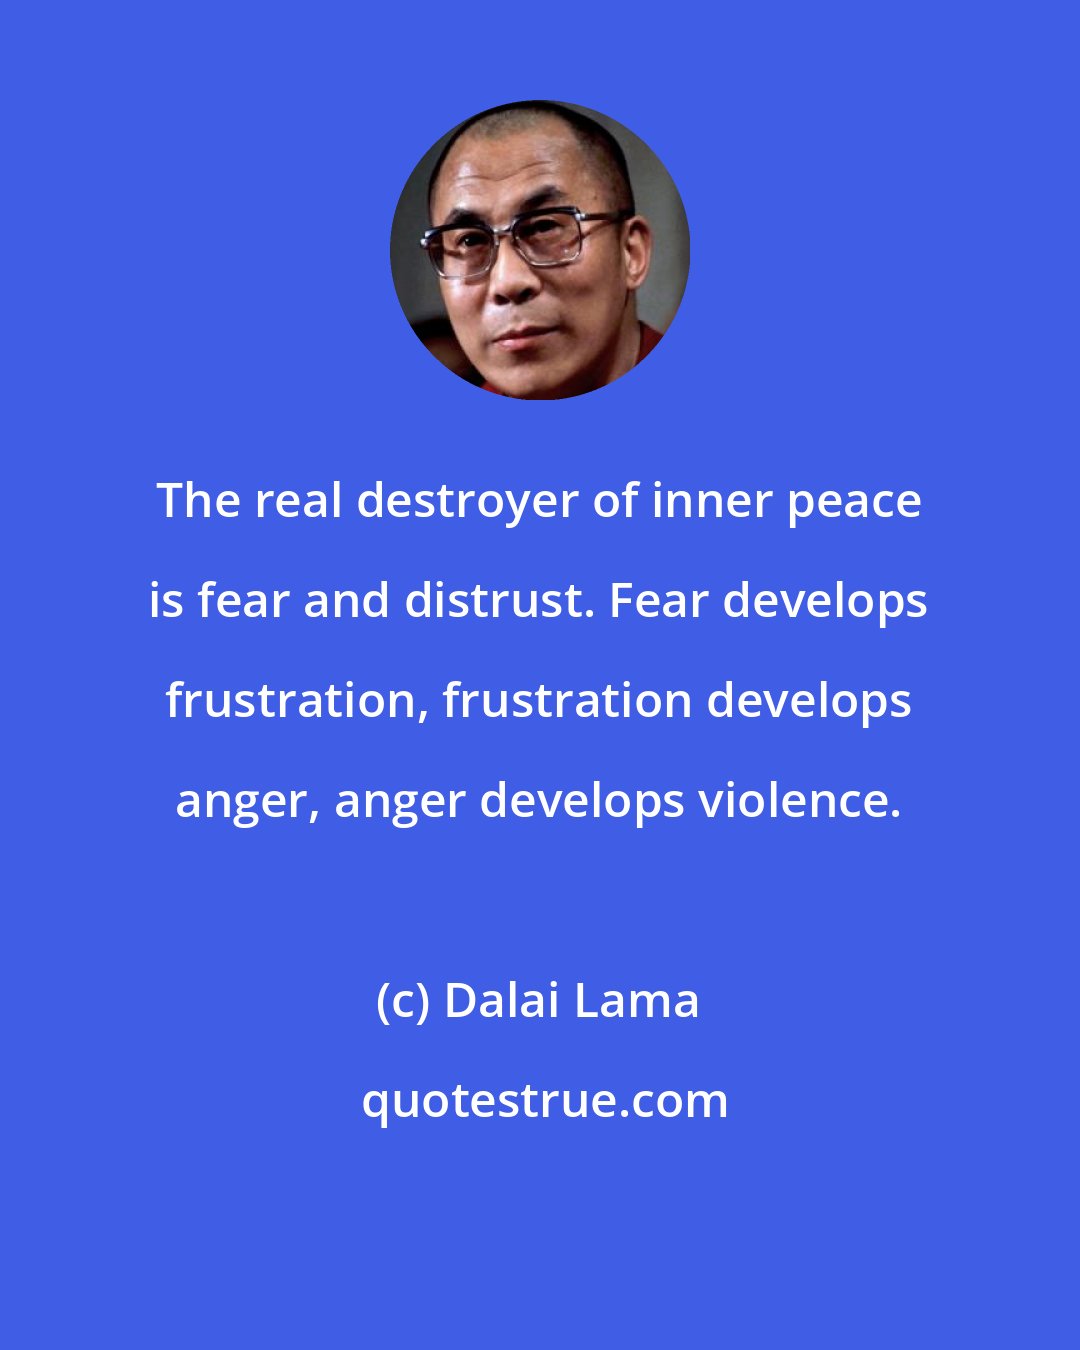 Dalai Lama: The real destroyer of inner peace is fear and distrust. Fear develops frustration, frustration develops anger, anger develops violence.